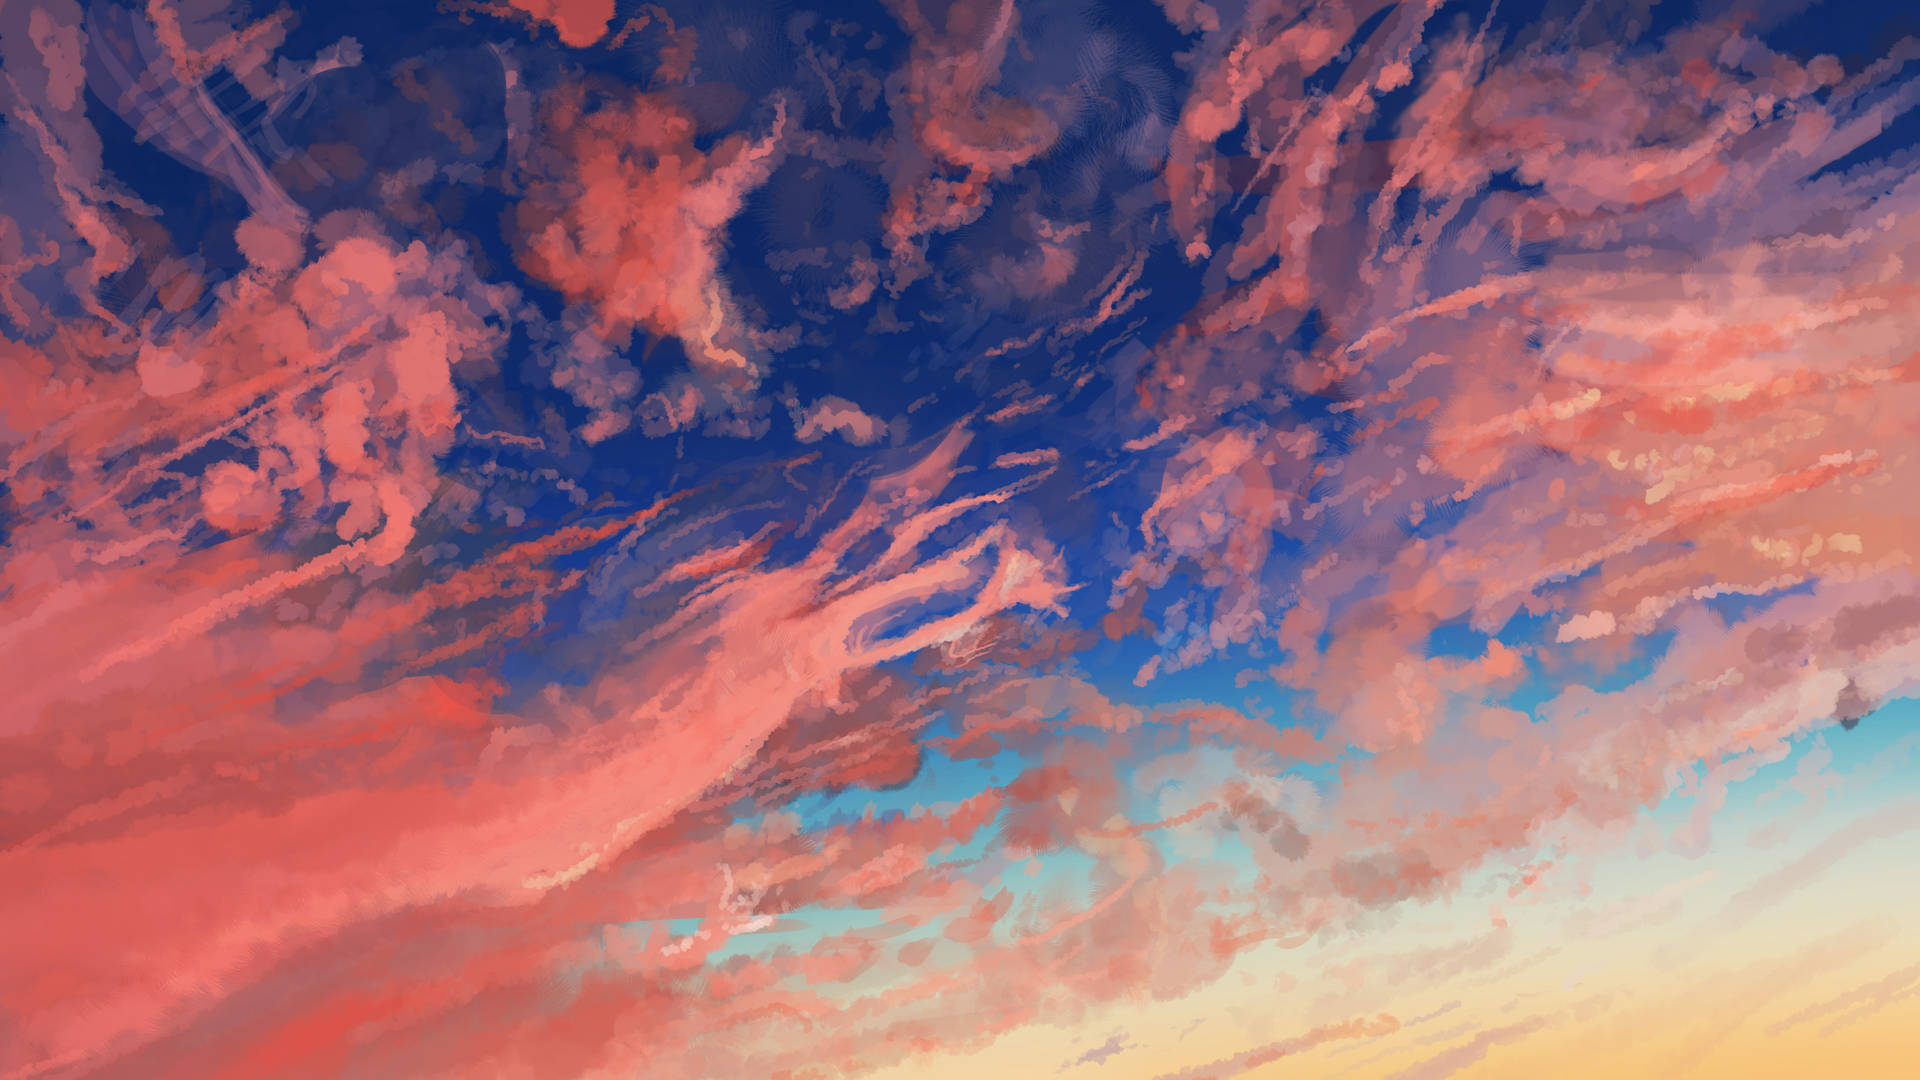 Aesthetic Clouds Painting Wallpaper